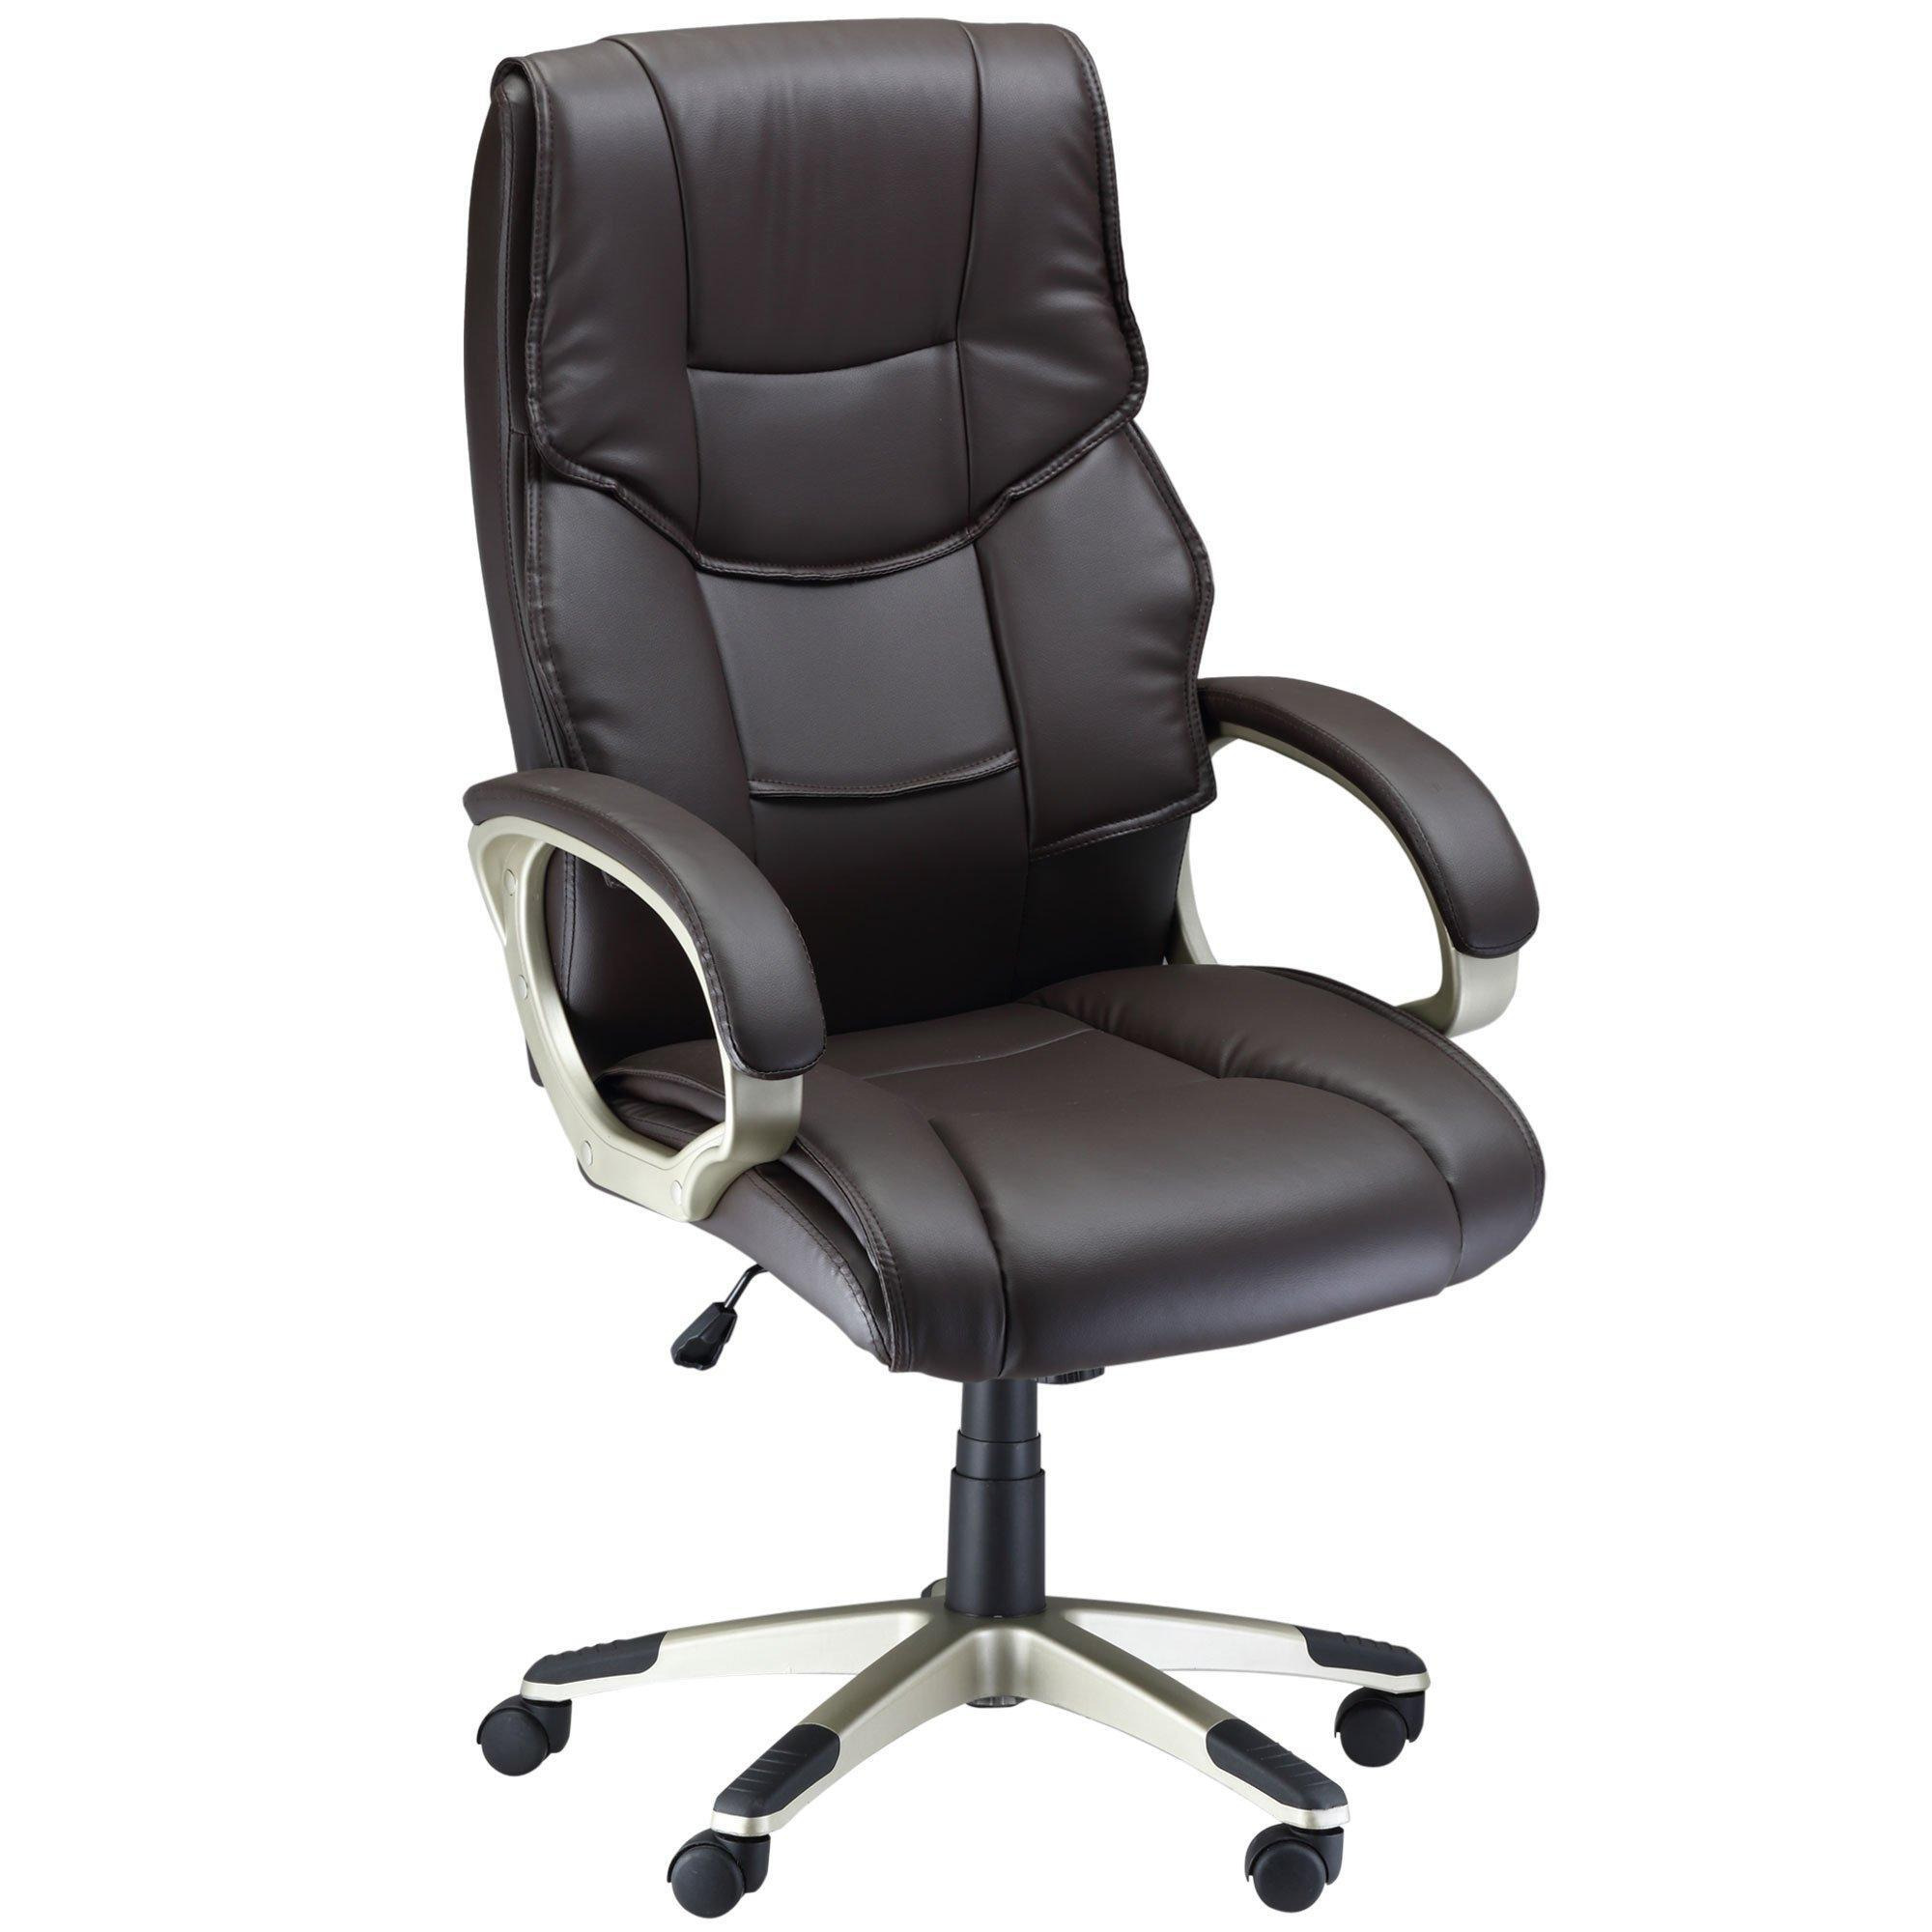 Executive Computer Office Desk Chair High Back Faux Leather - image 1